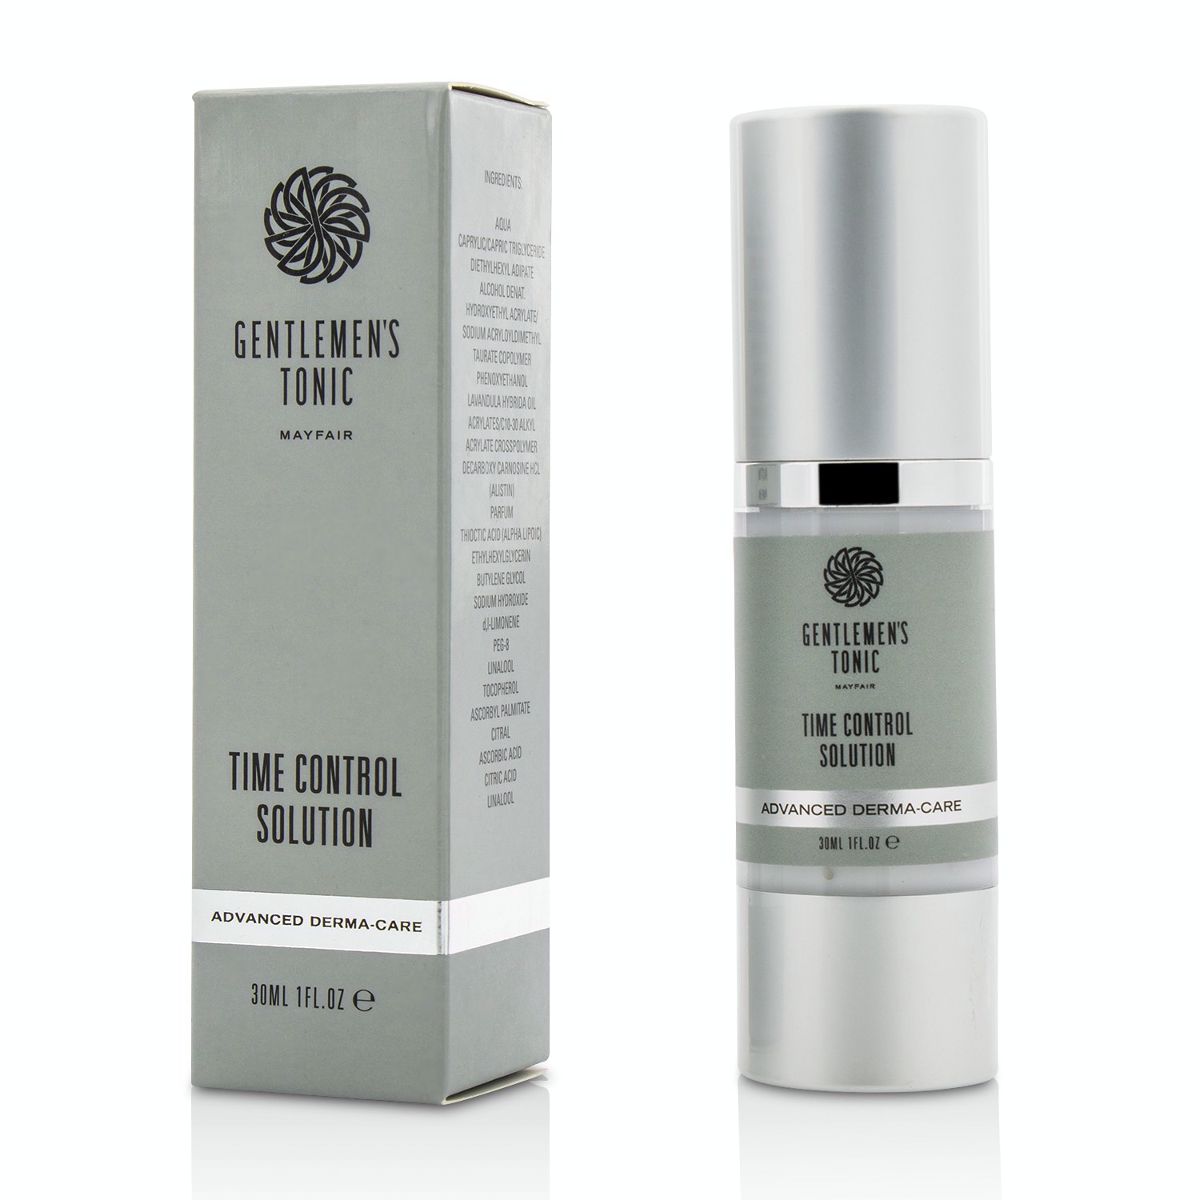 Advanced Derma-Care Time Control Solution Gentlemens Tonic Image